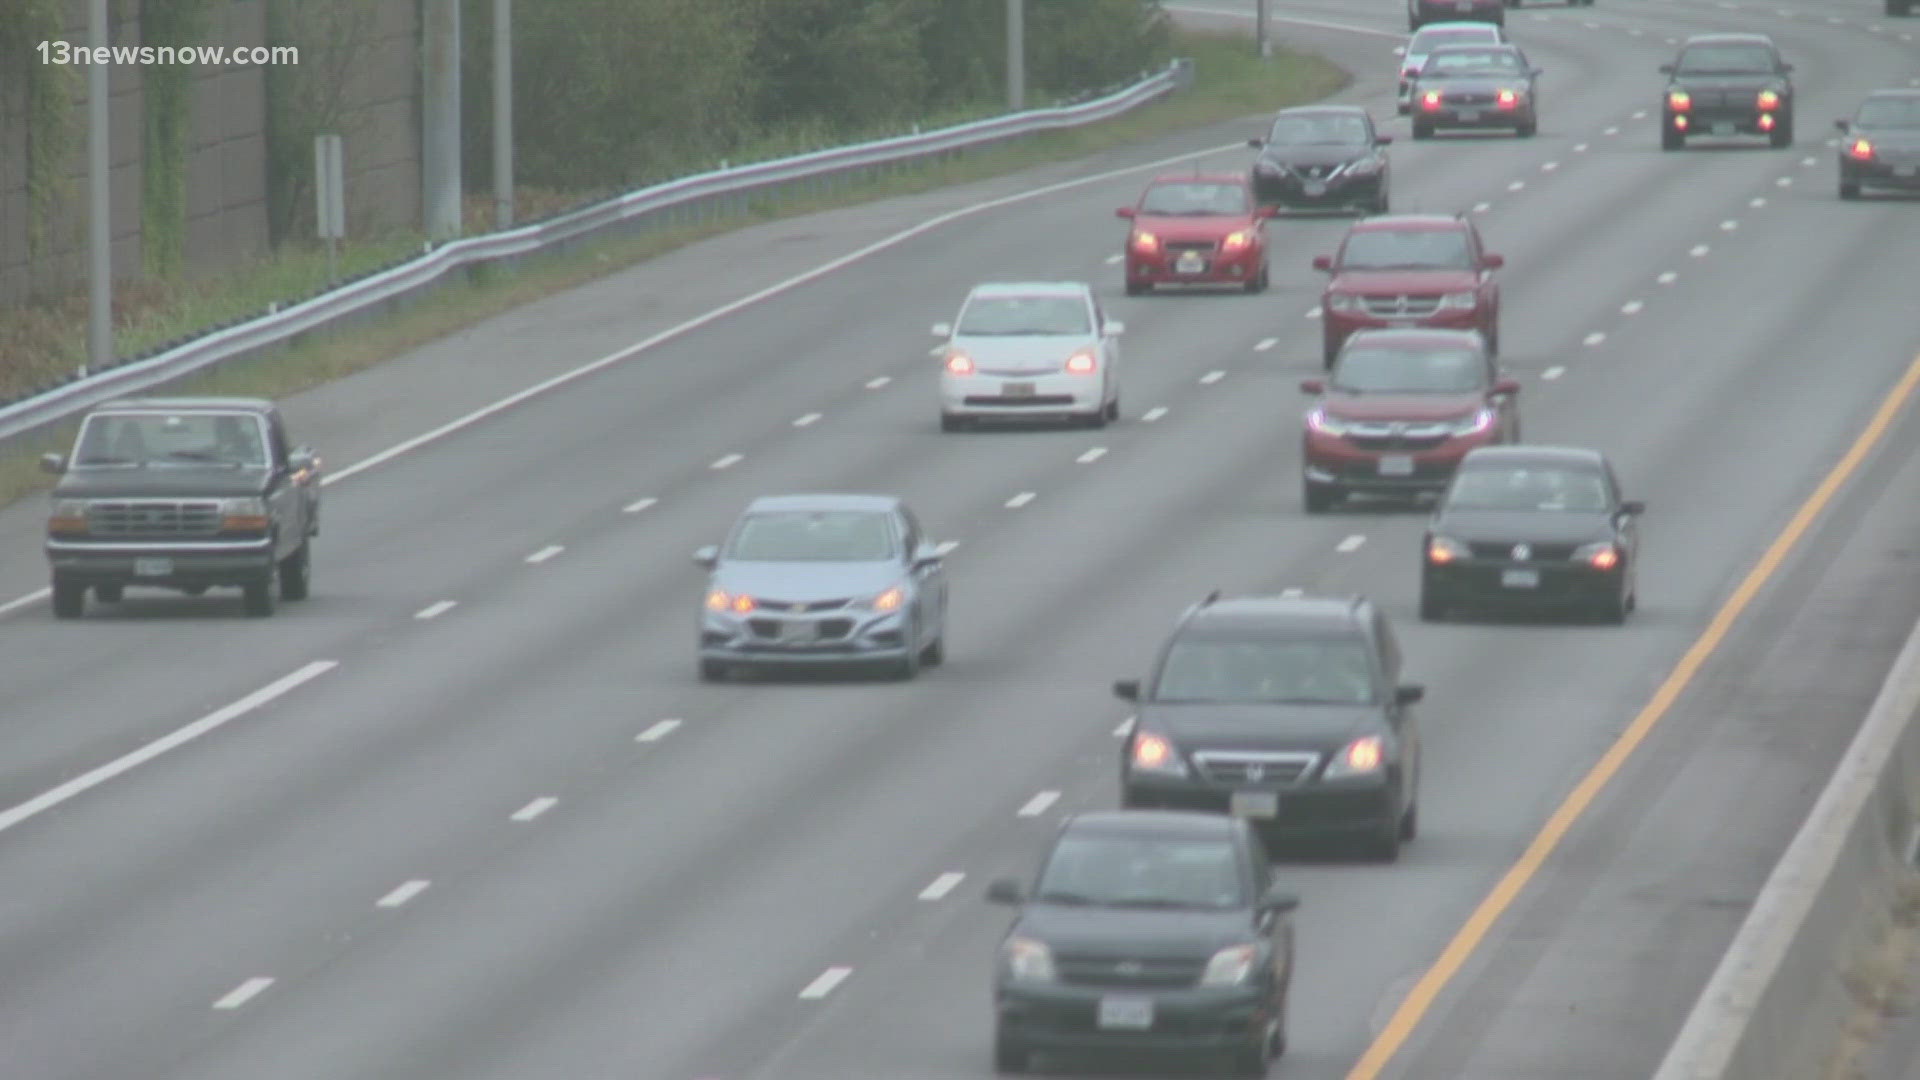 A new report shows fatal crashes have increased more than 20% in the last decade.